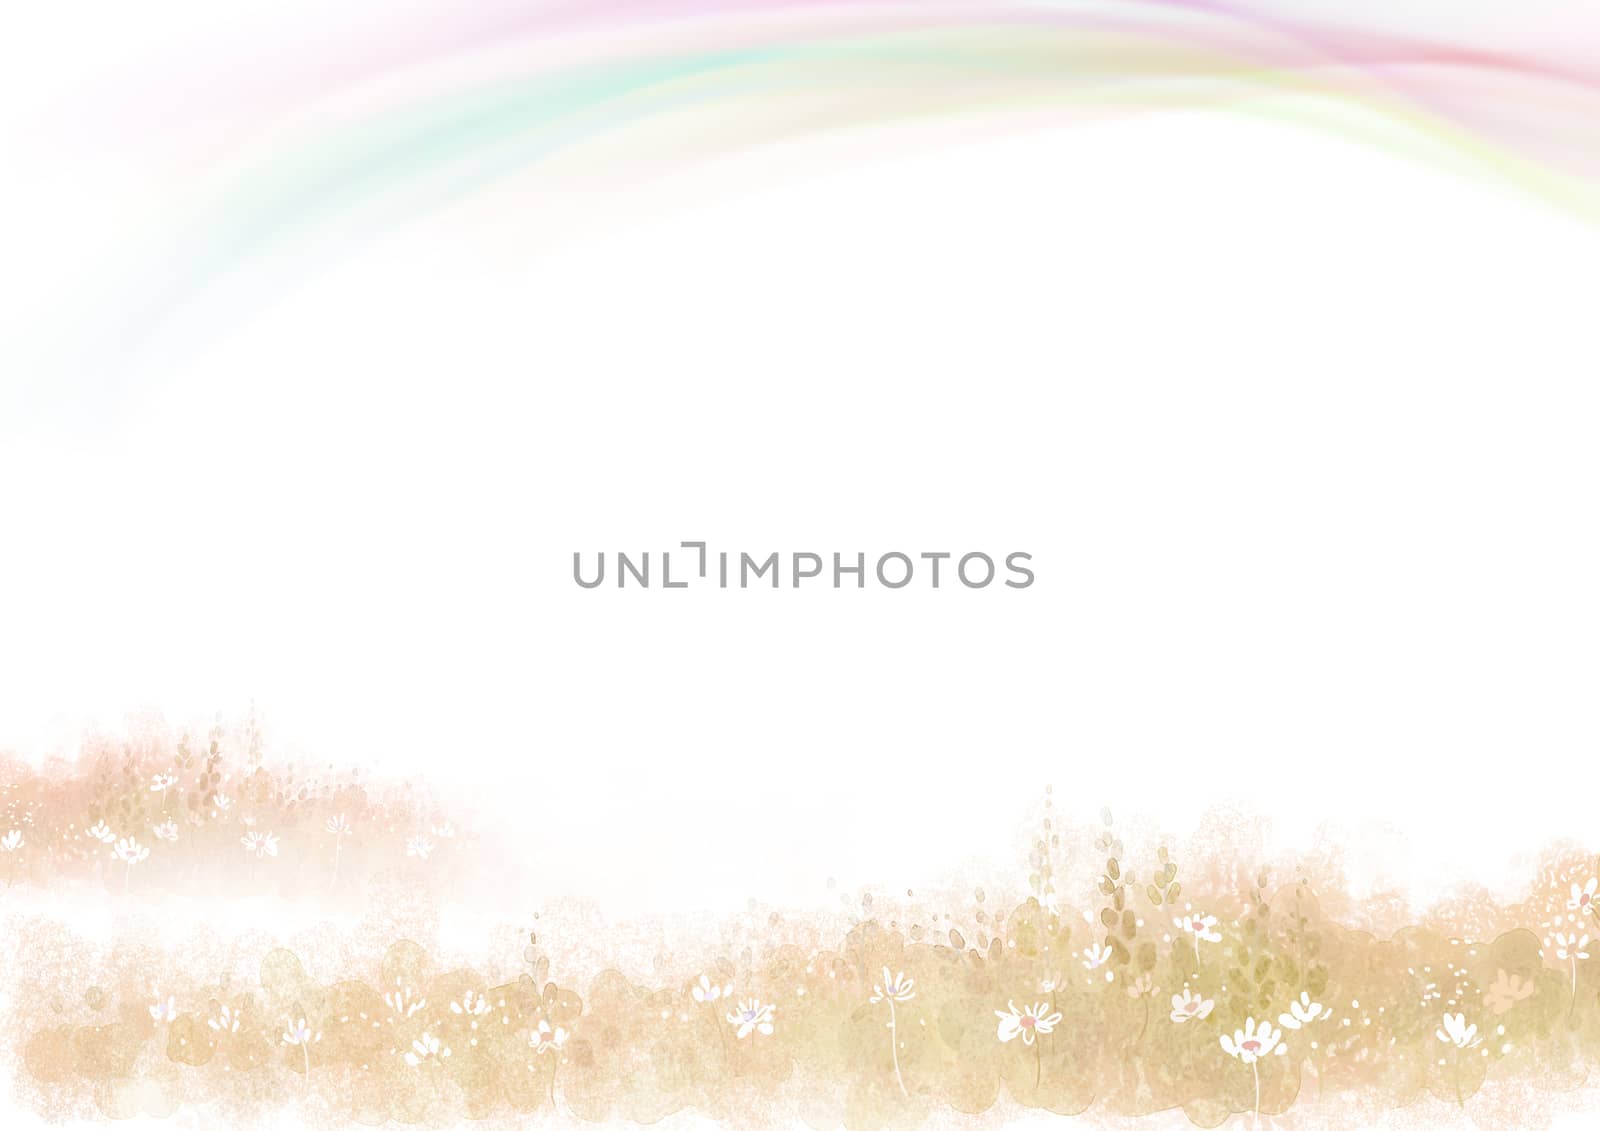 Fairytale blank template paper background with rainbow, plants,  by cougarsan